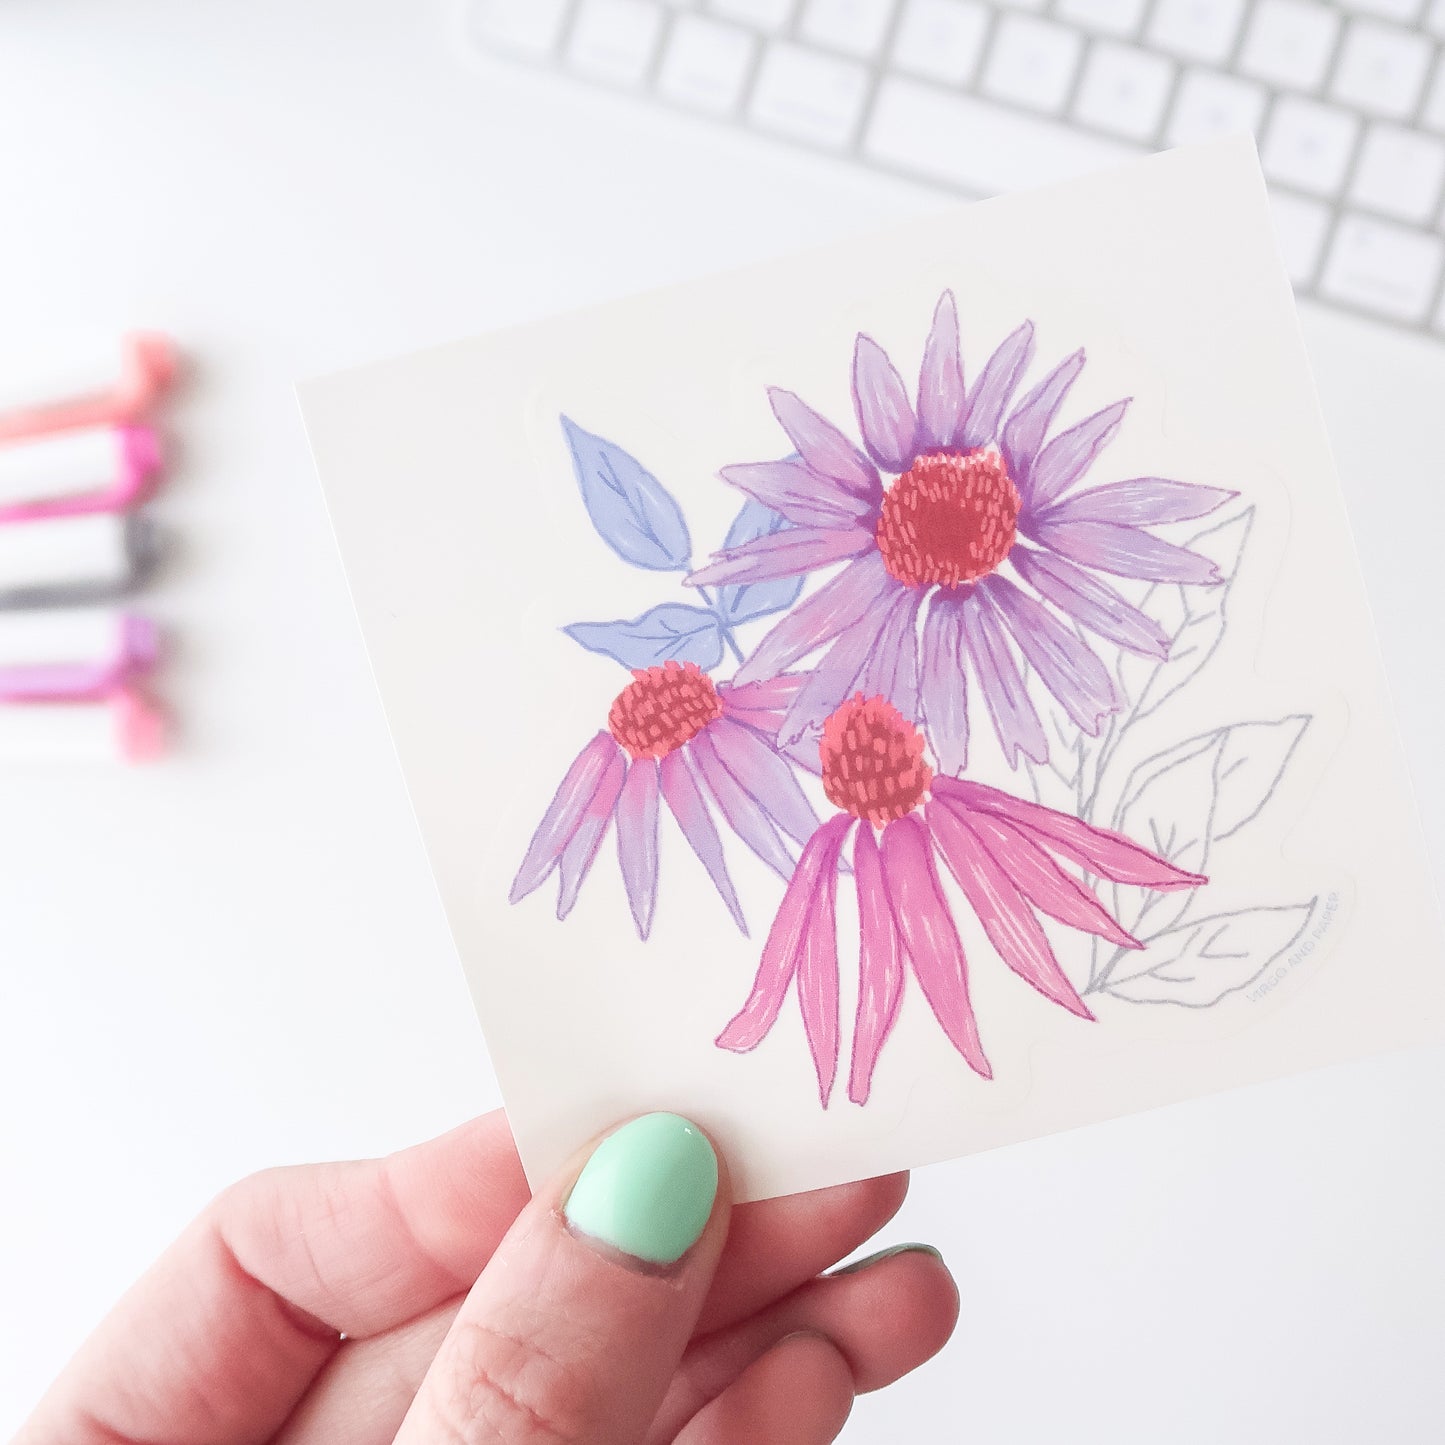 Load image into Gallery viewer, Imagine Floral Die Cut Clear Vinyl Sticker
